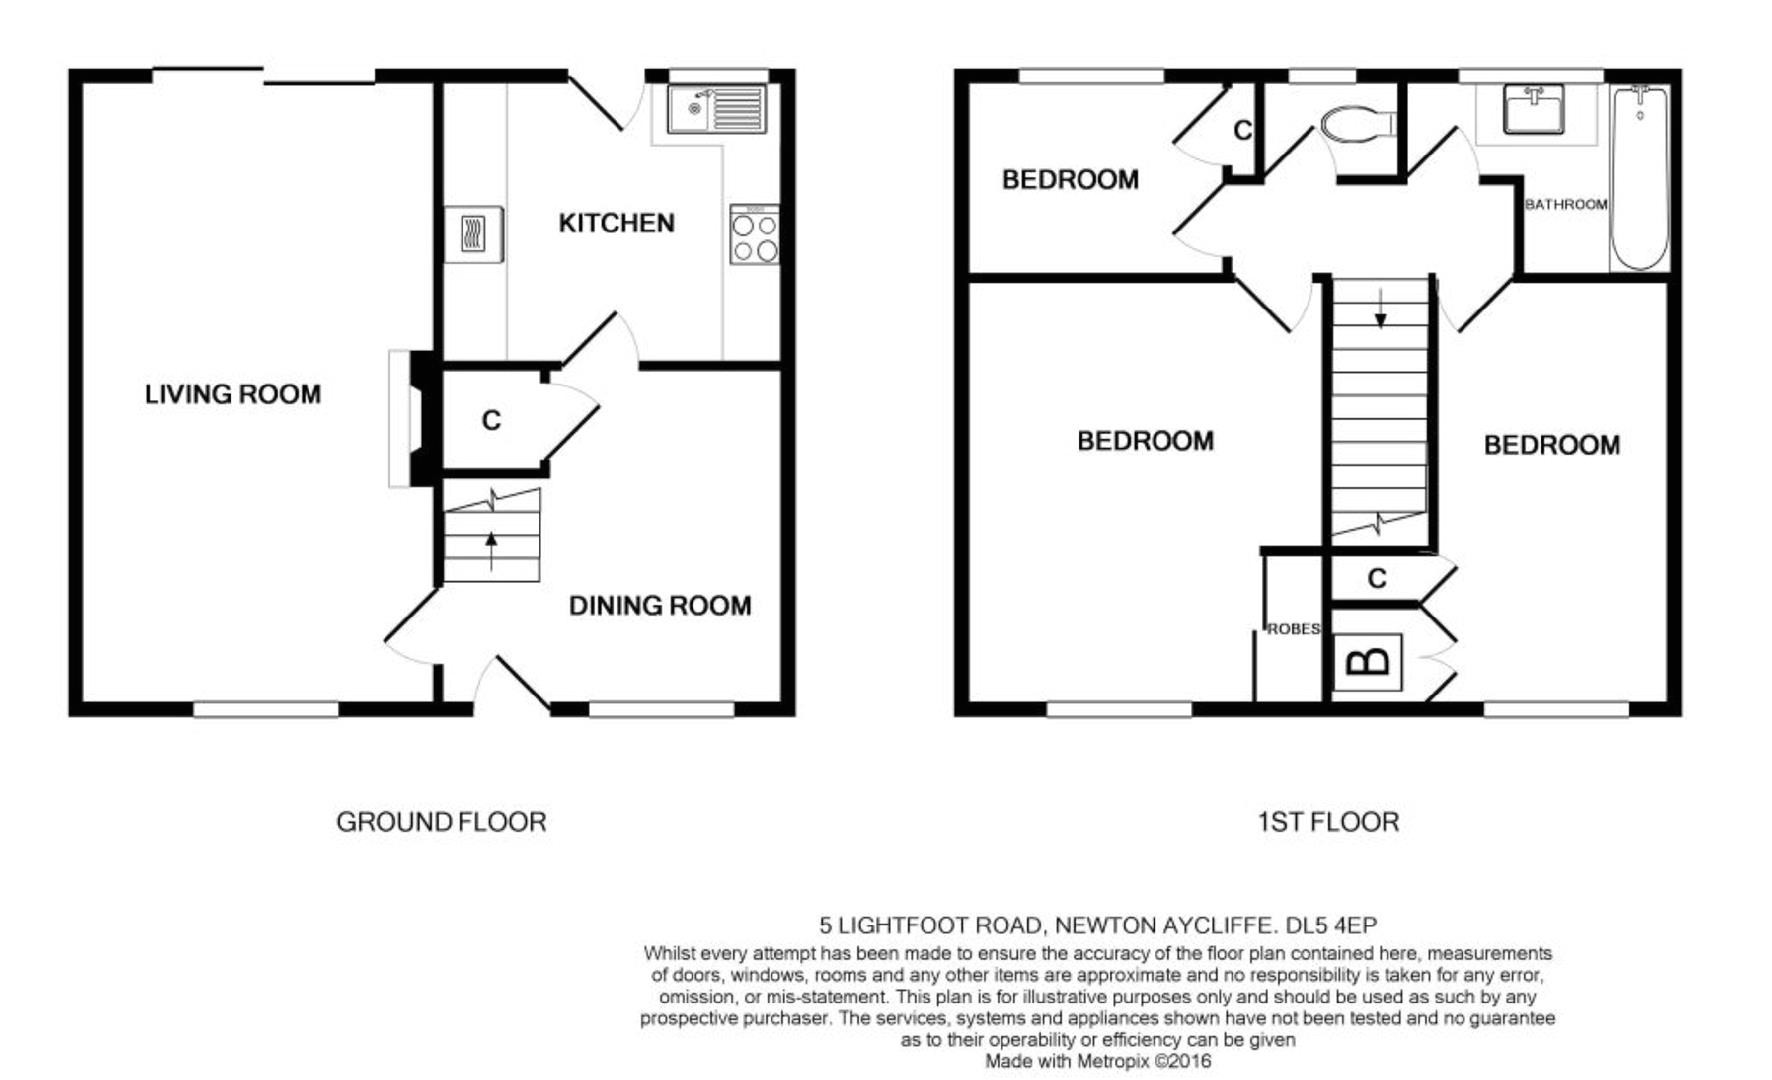 Home Plan Newton Aycliffe Lightfoot Road Newton Aycliffe 3 Bed Terraced House for